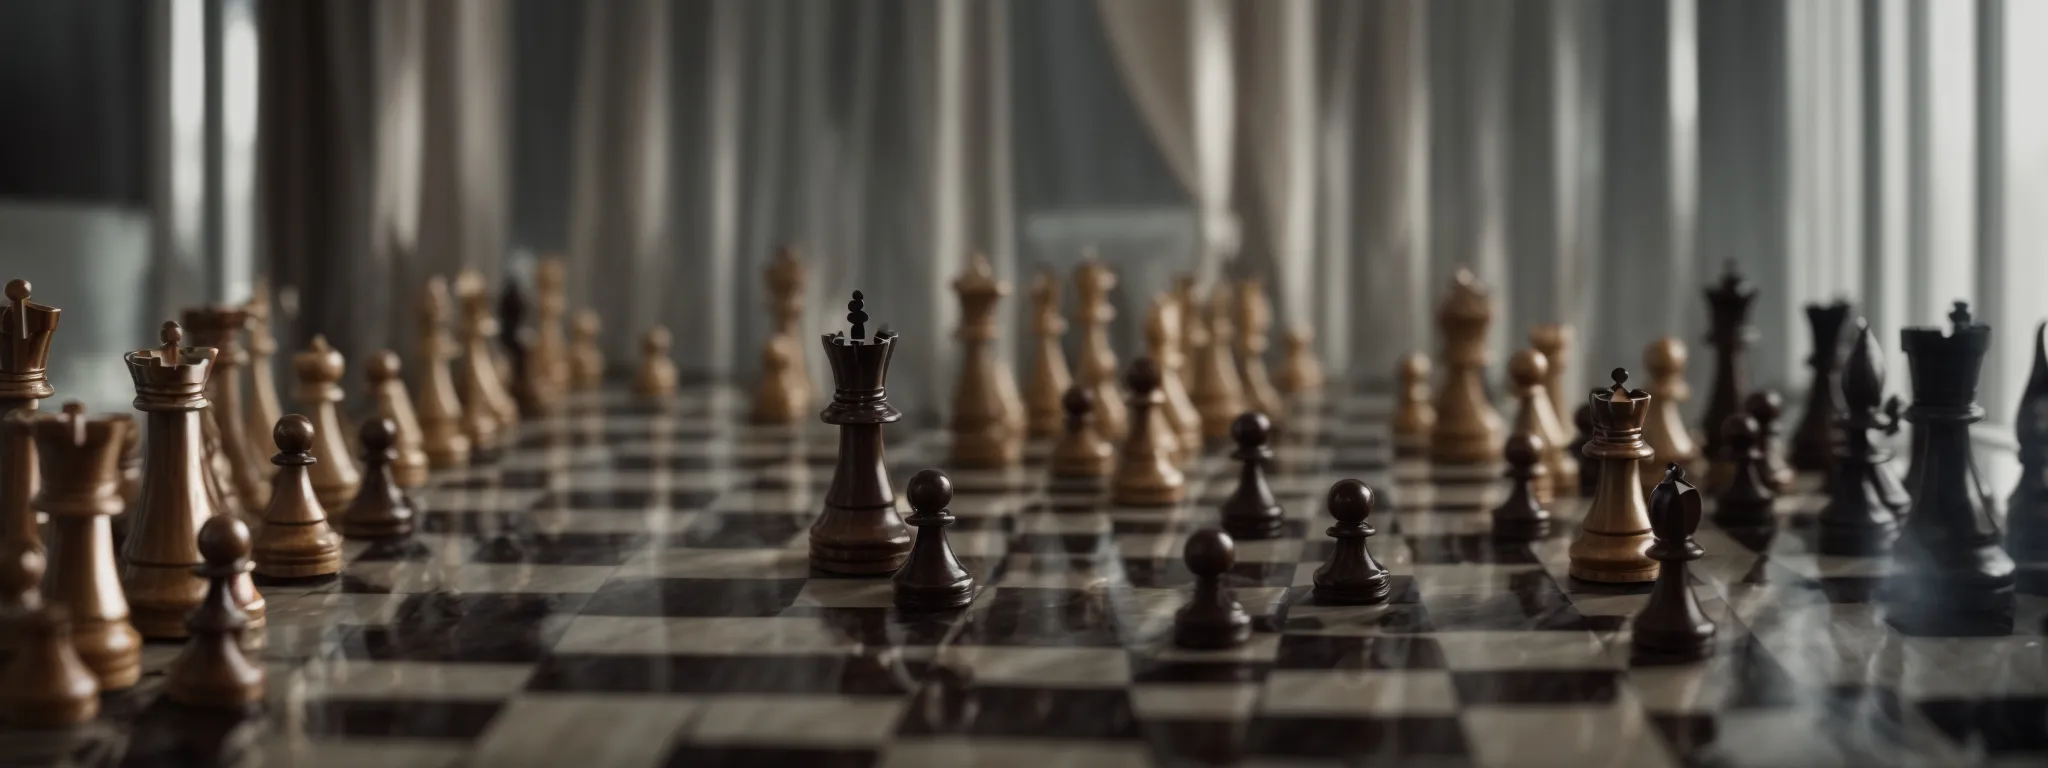 chess pieces on a board with one towering over the others, symbolizing strategic dominance.